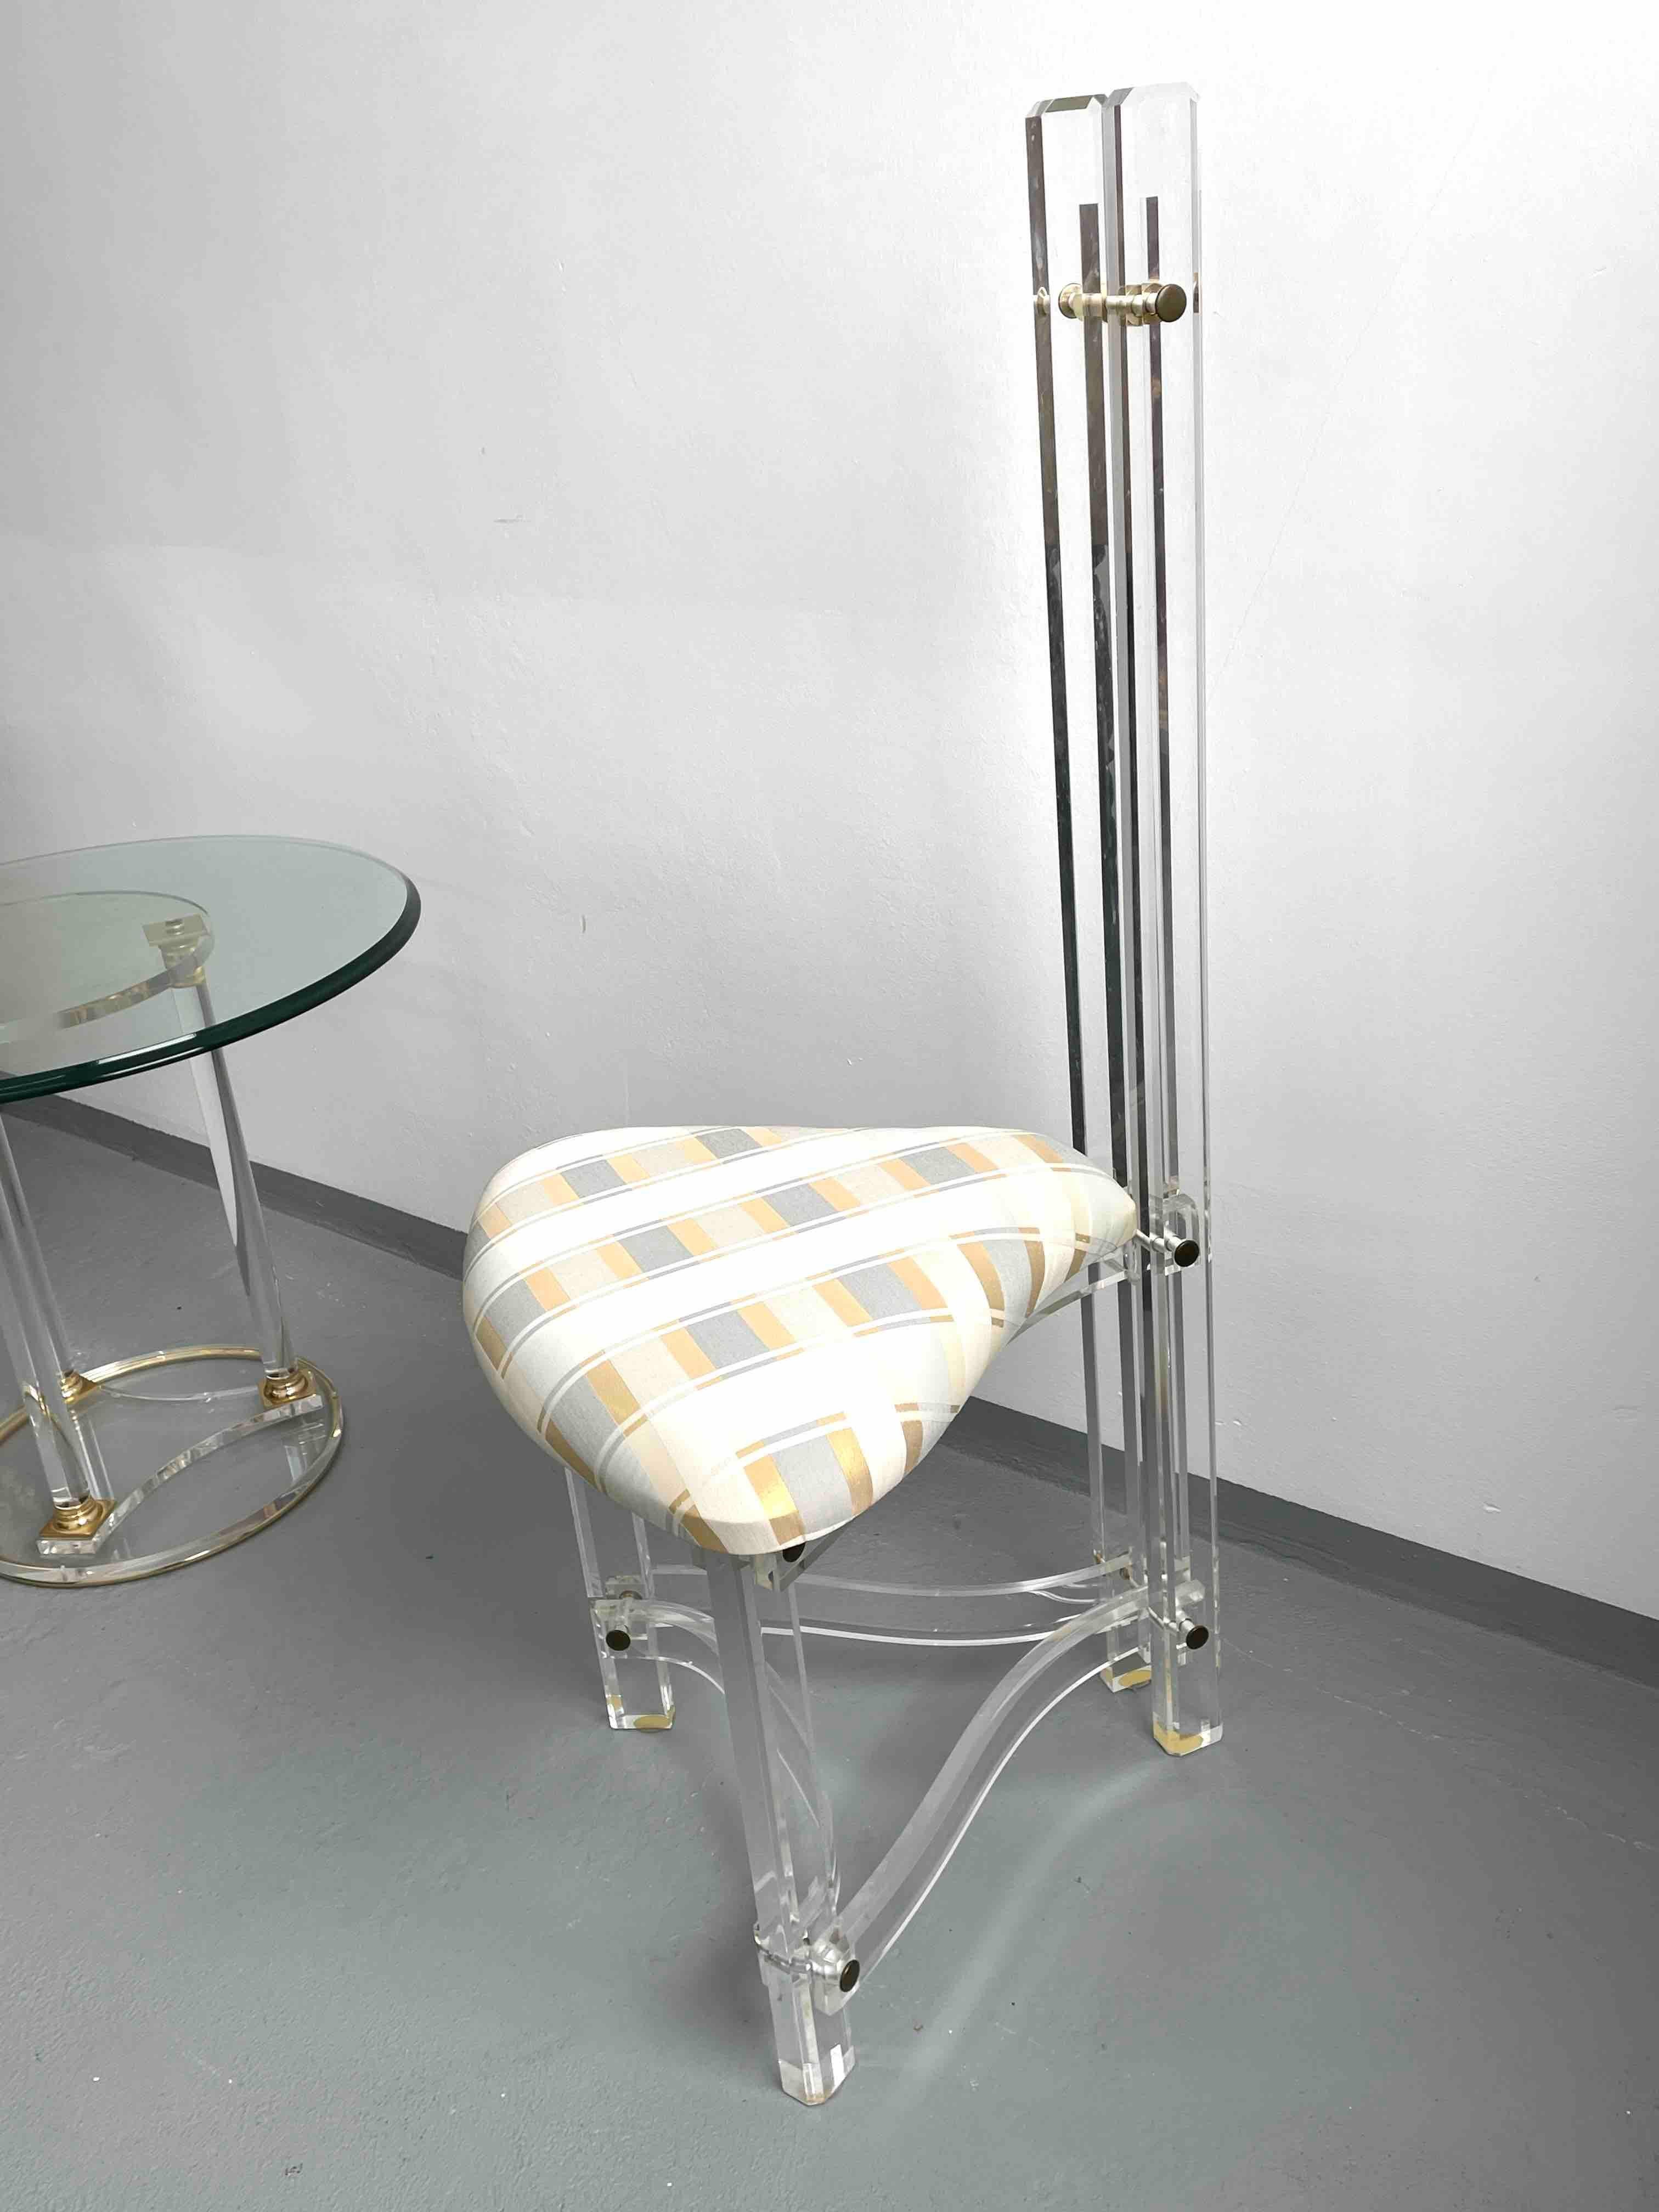 Lucite Telephone Table and Chair Hallway Waiting Area Set, Germany 1980s For Sale 3